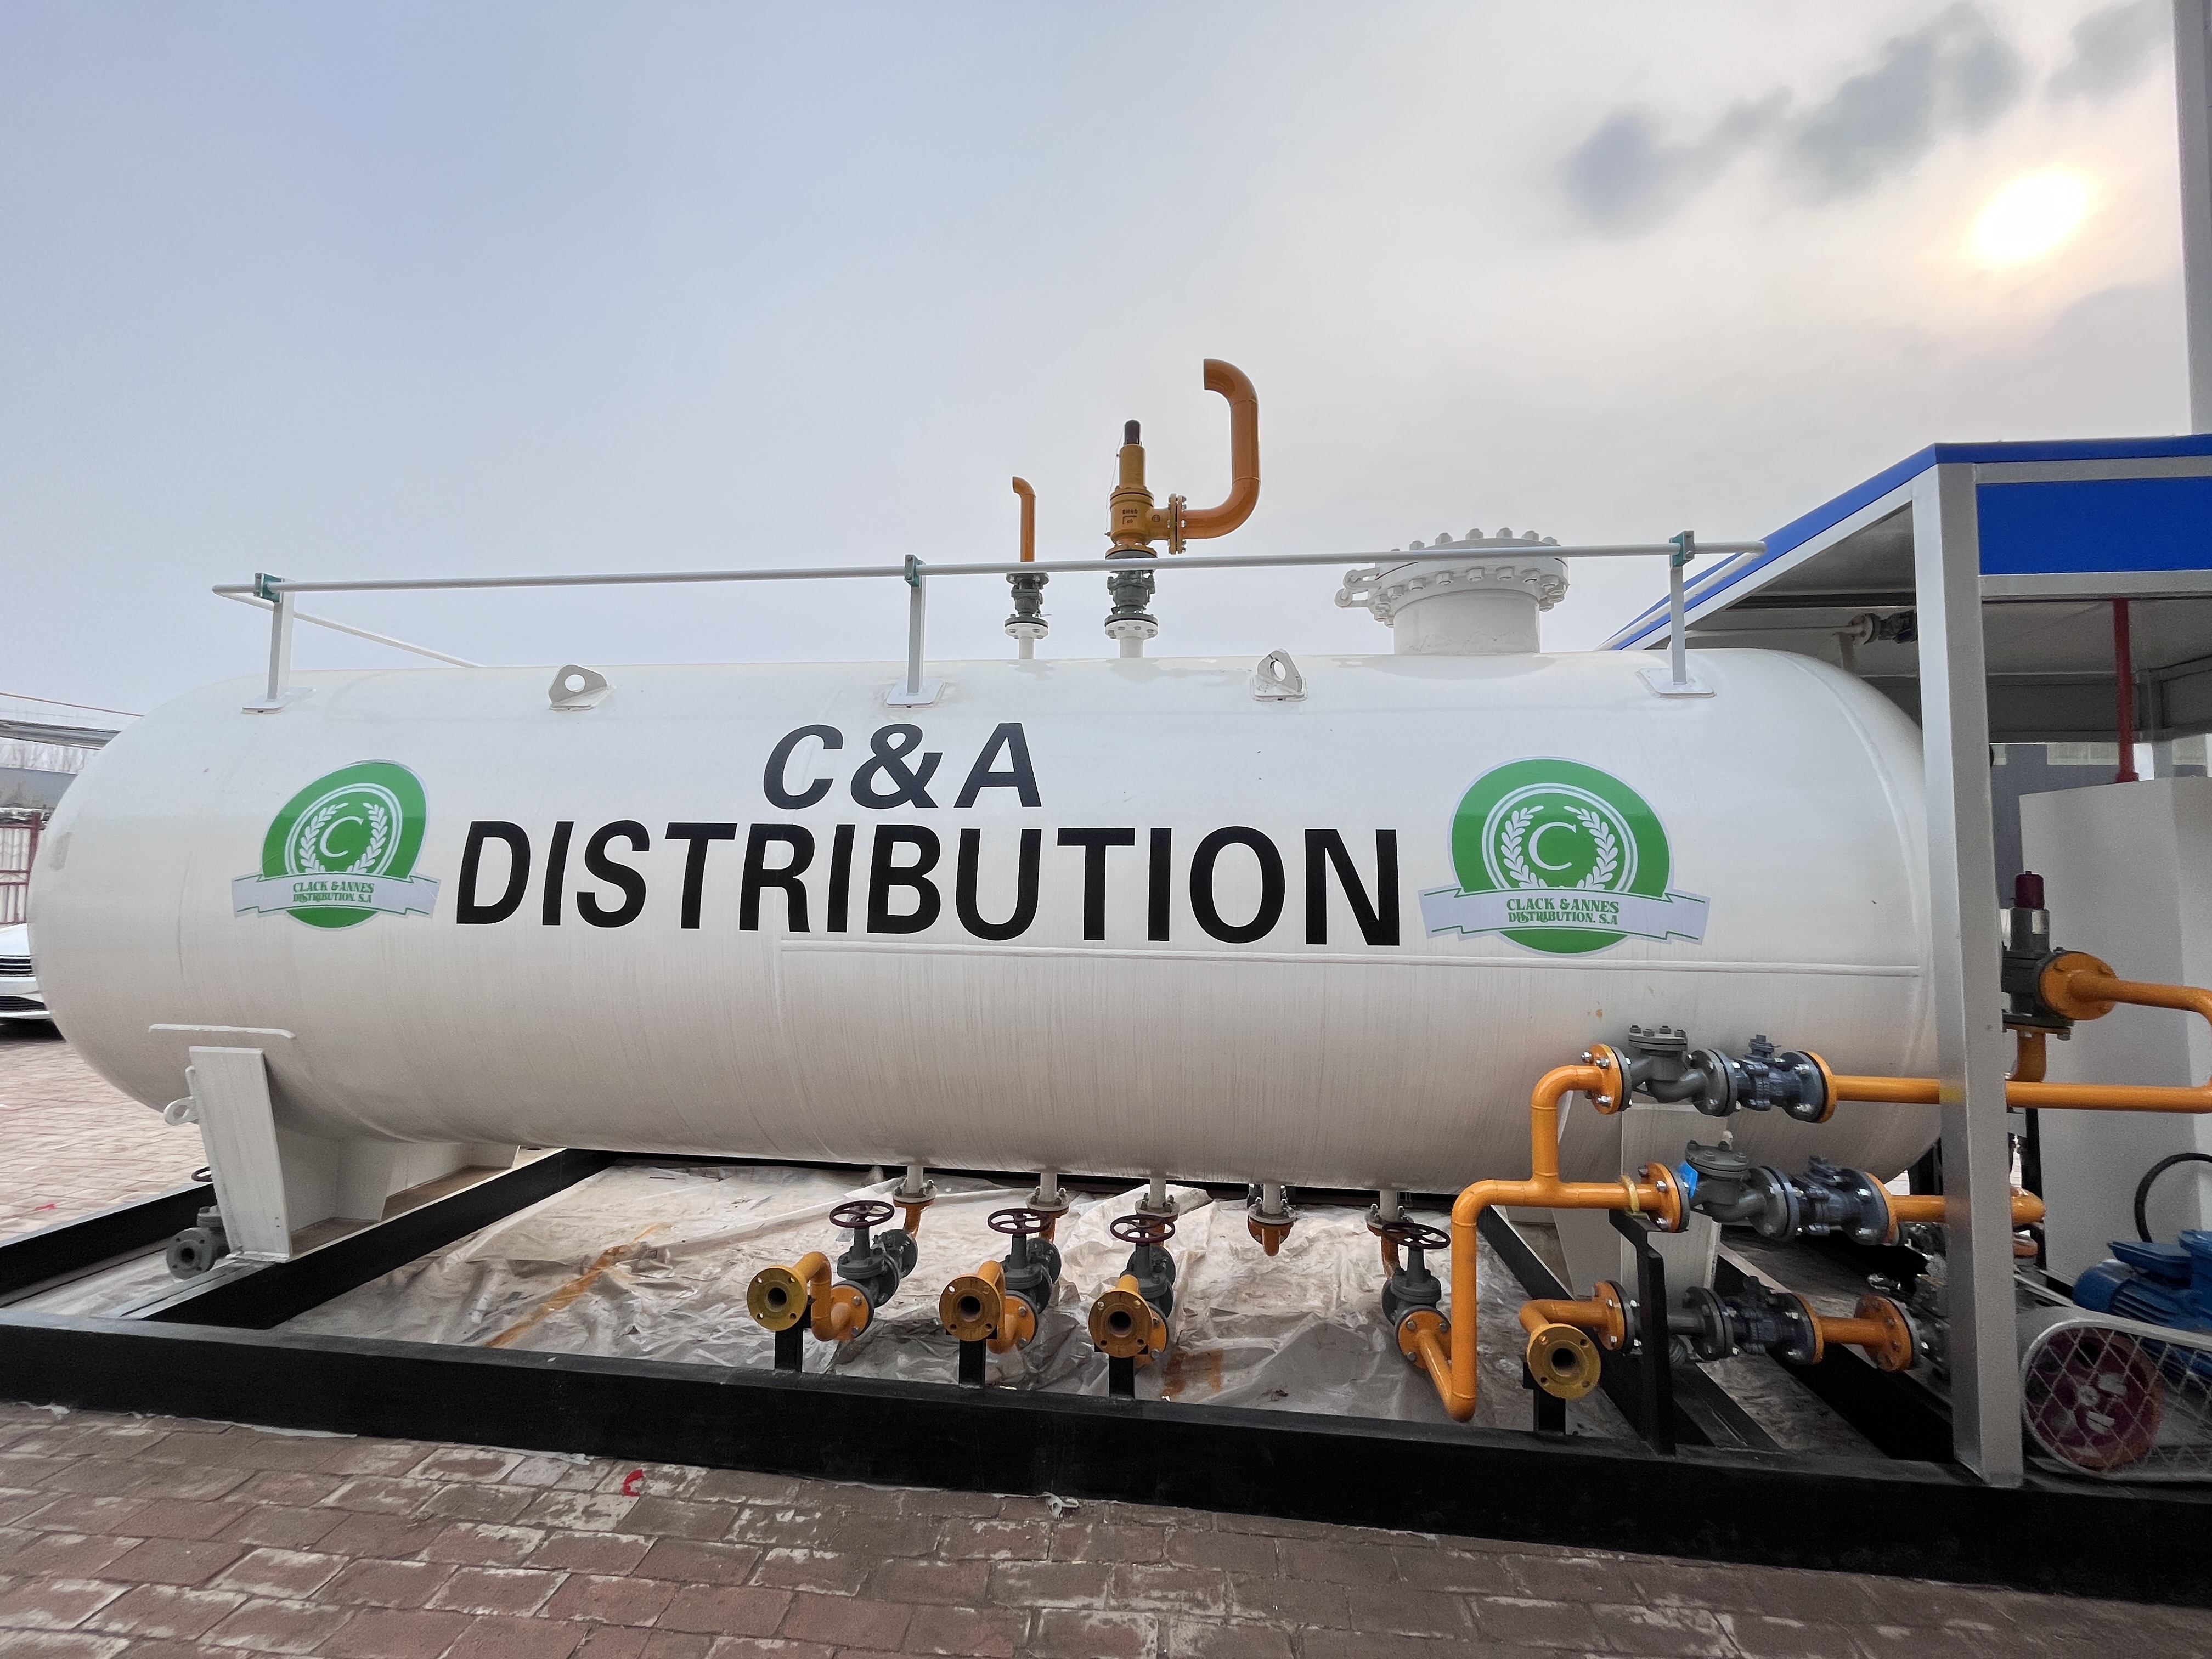 Design Requirements for LPG Gasification Station